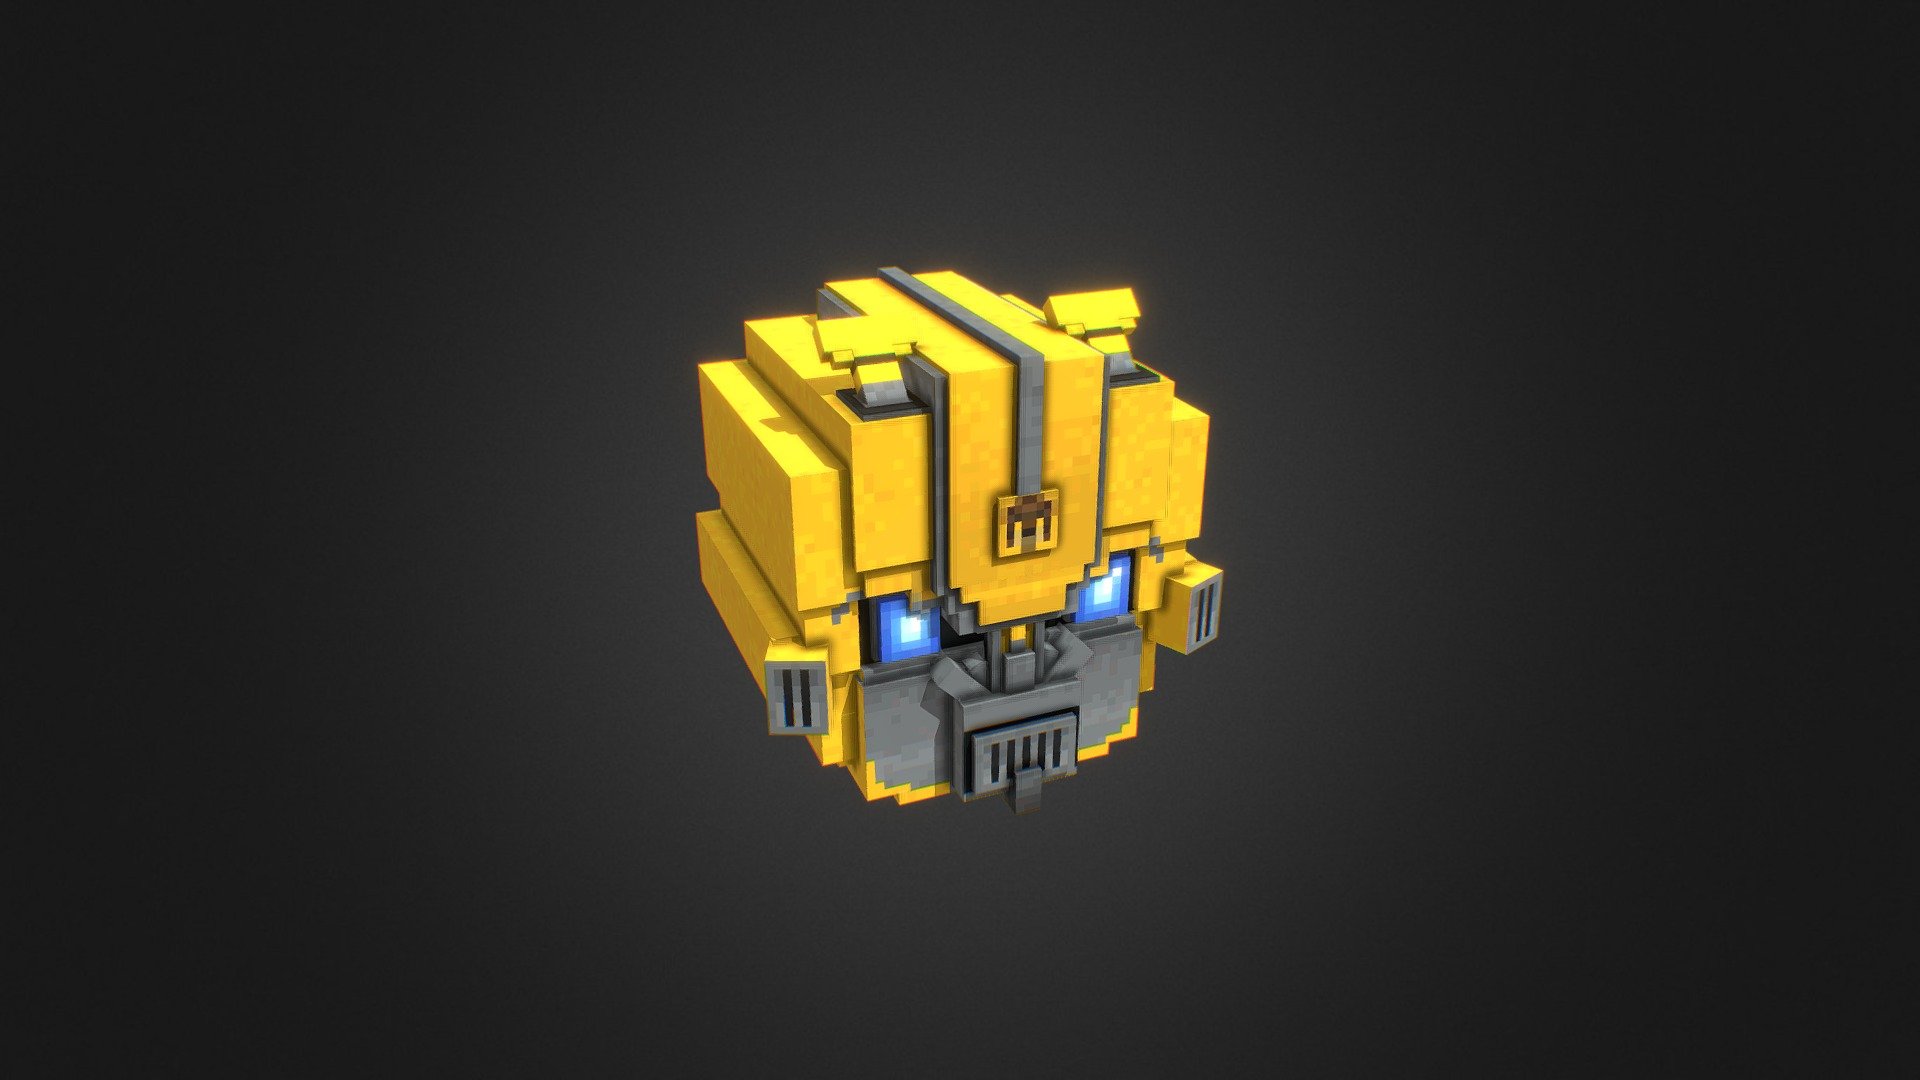 This model comes from the Transformers event organized by the Youtuber Siphano 3d model